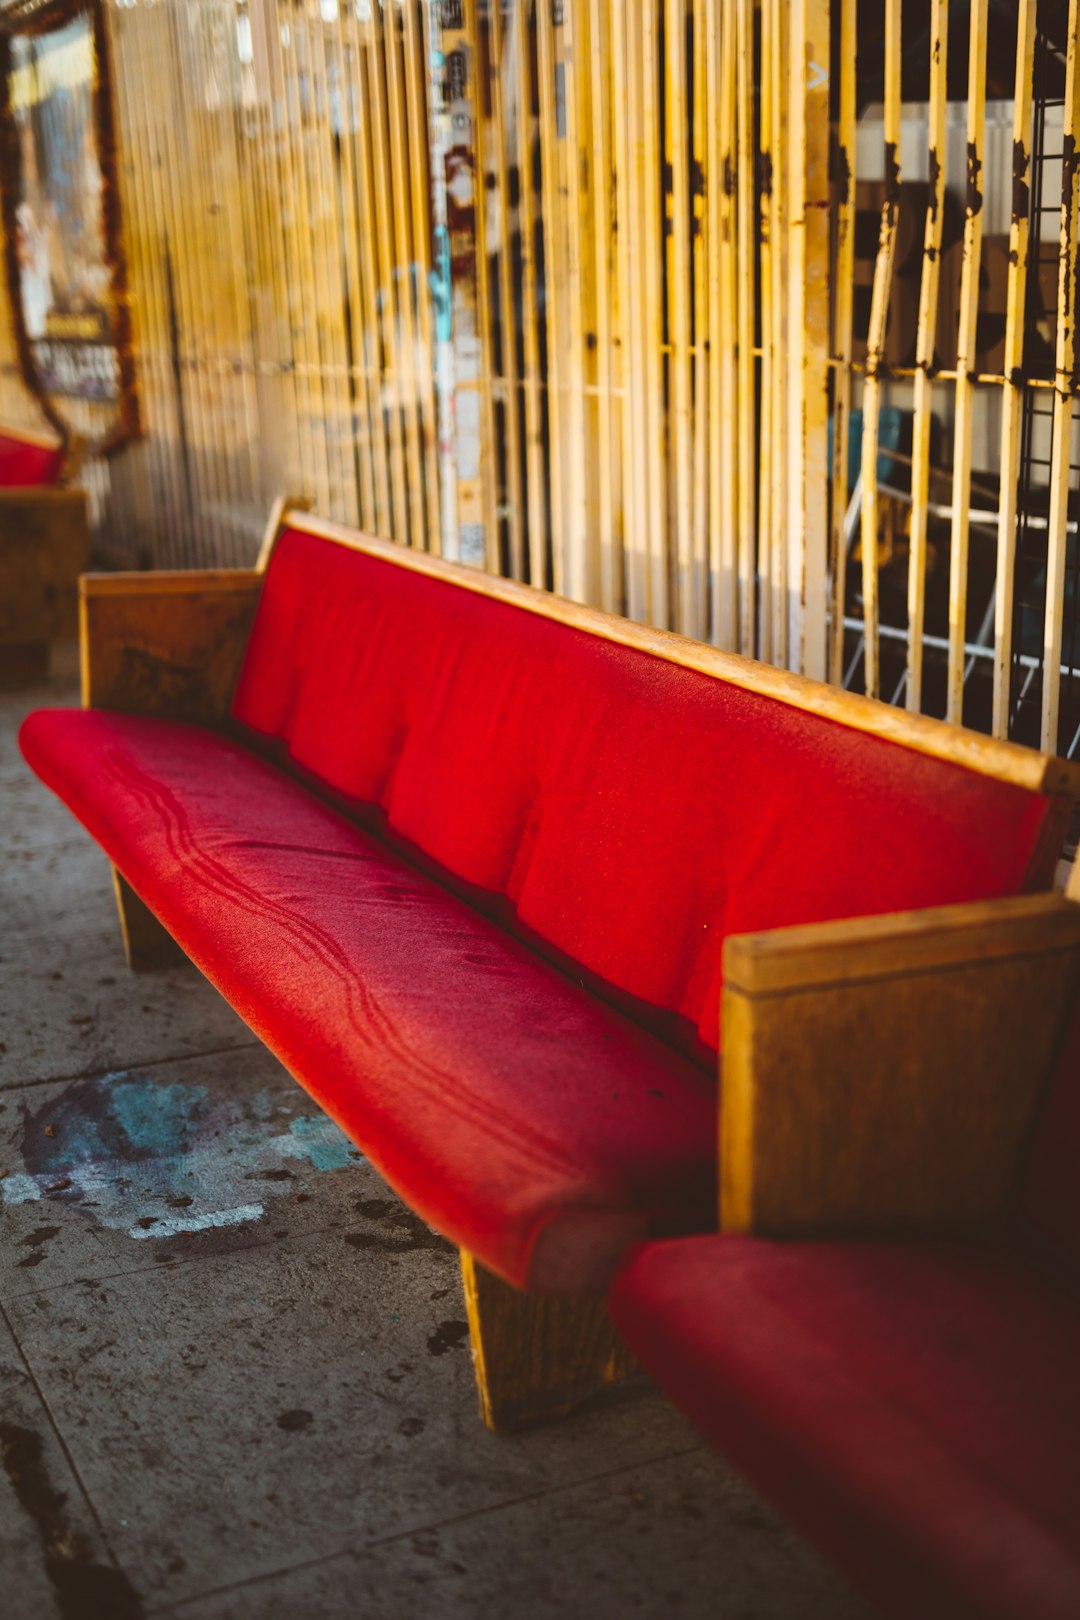 empty red fabric couch